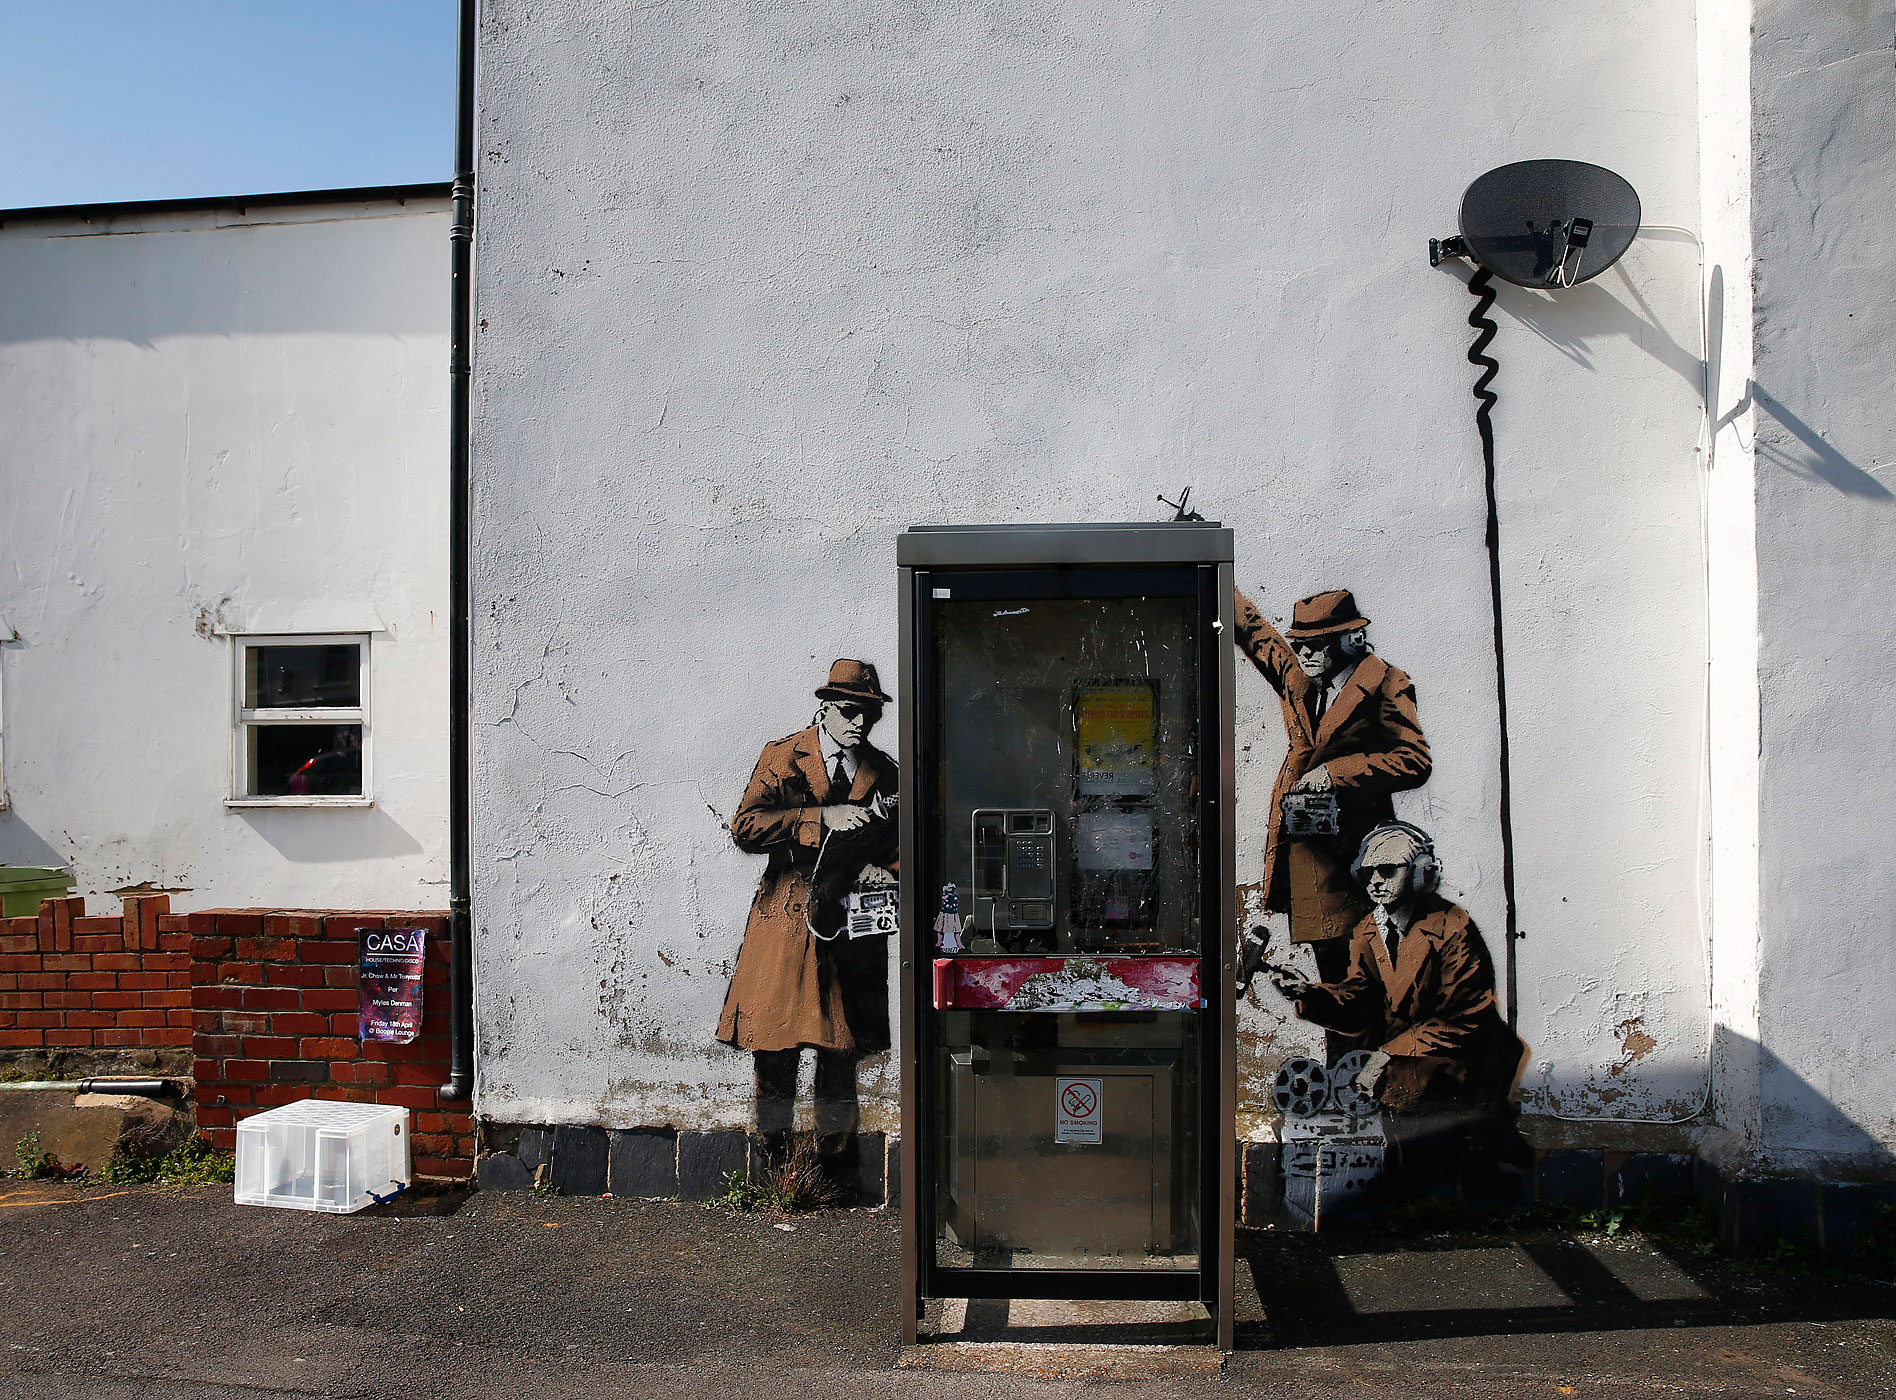 Graffiti art is seen on a wall near the headquarters of Britain's eavesdropping agency, GCHQ, in Cheltenham, western England